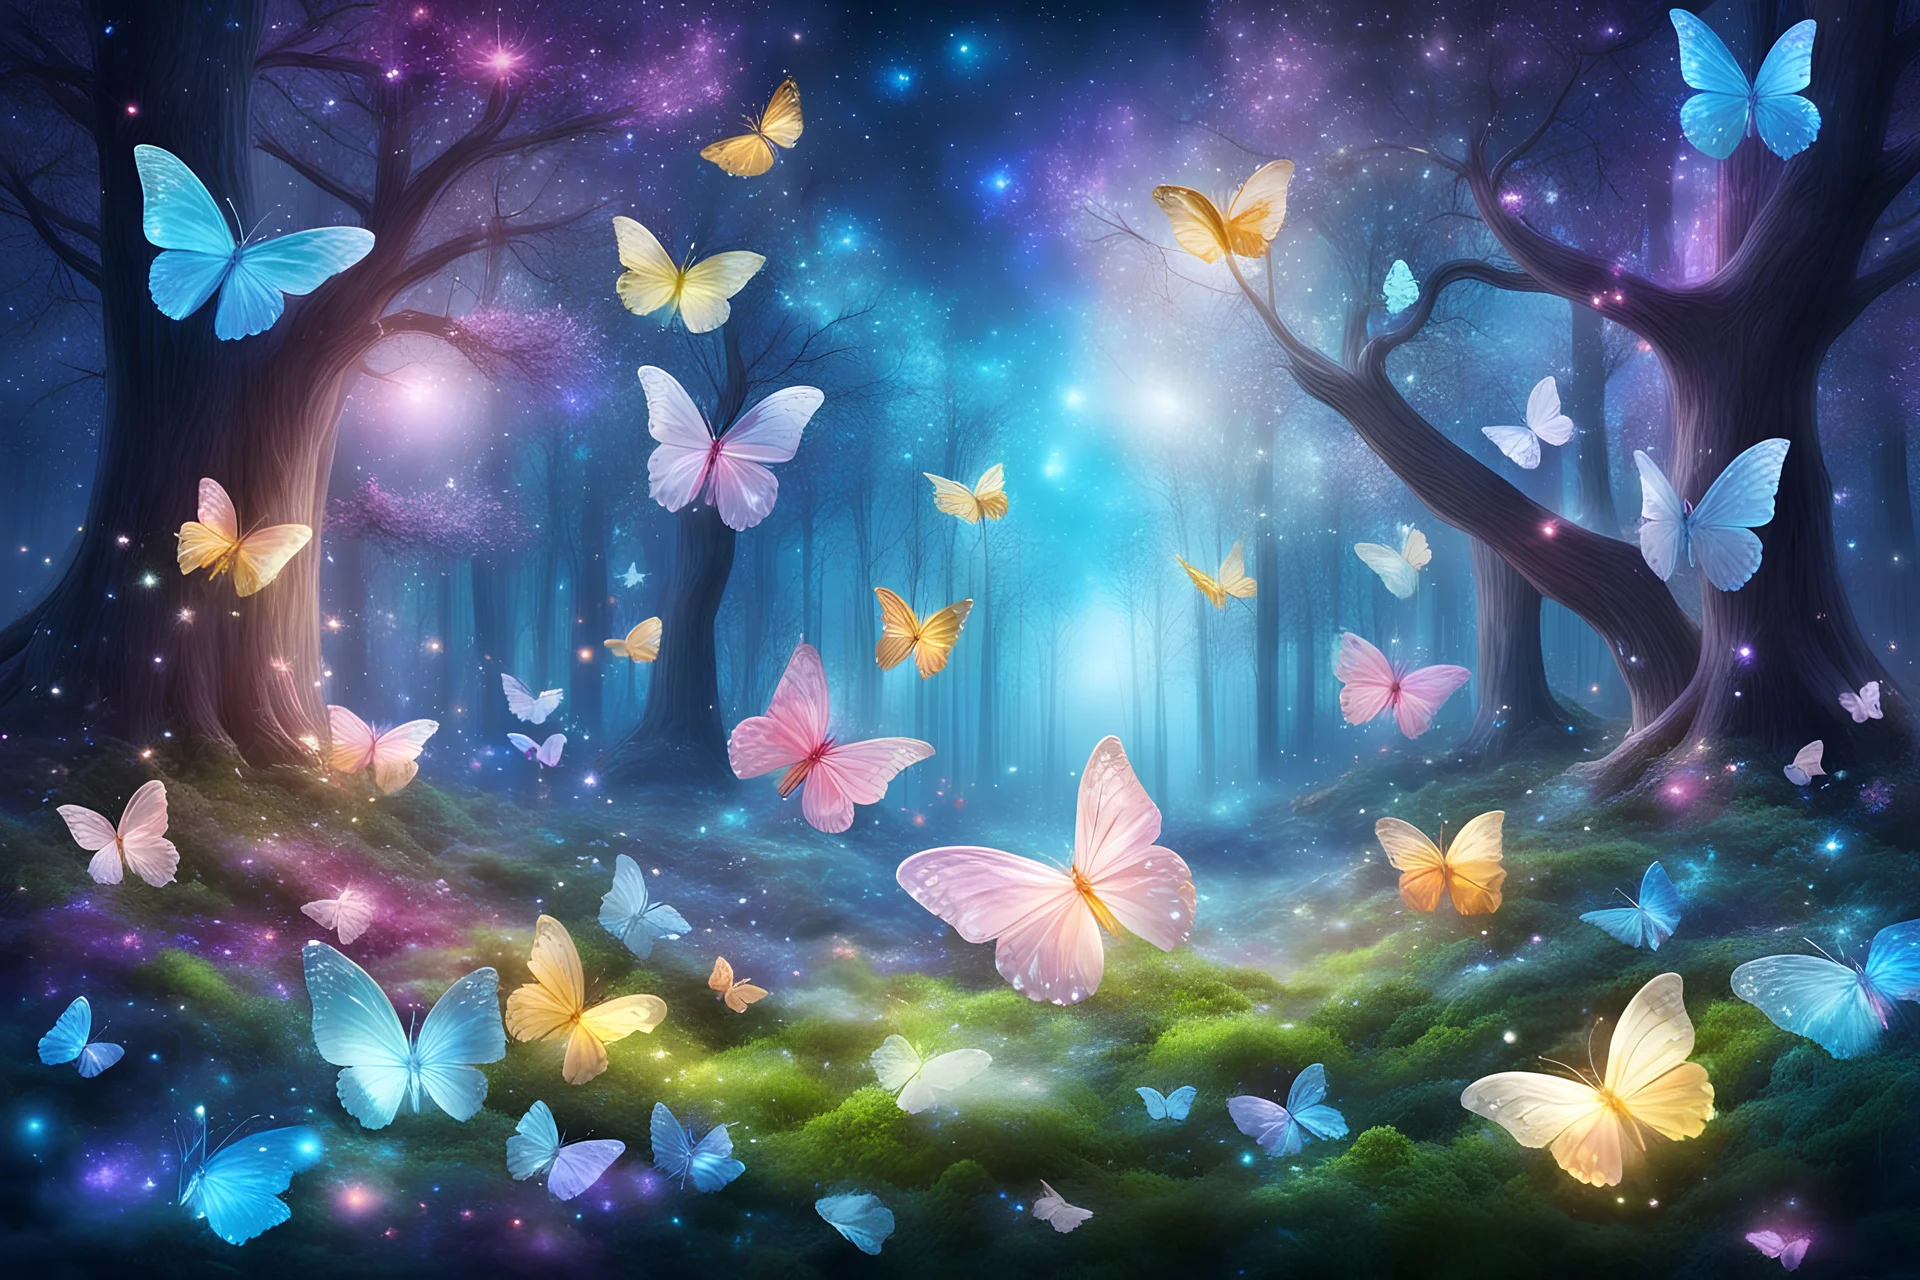 fairy forest with Cristal flower and colored magic trees in the background a cosmic sky with bright stars and shine beam and luminescent Cristal white butterflies